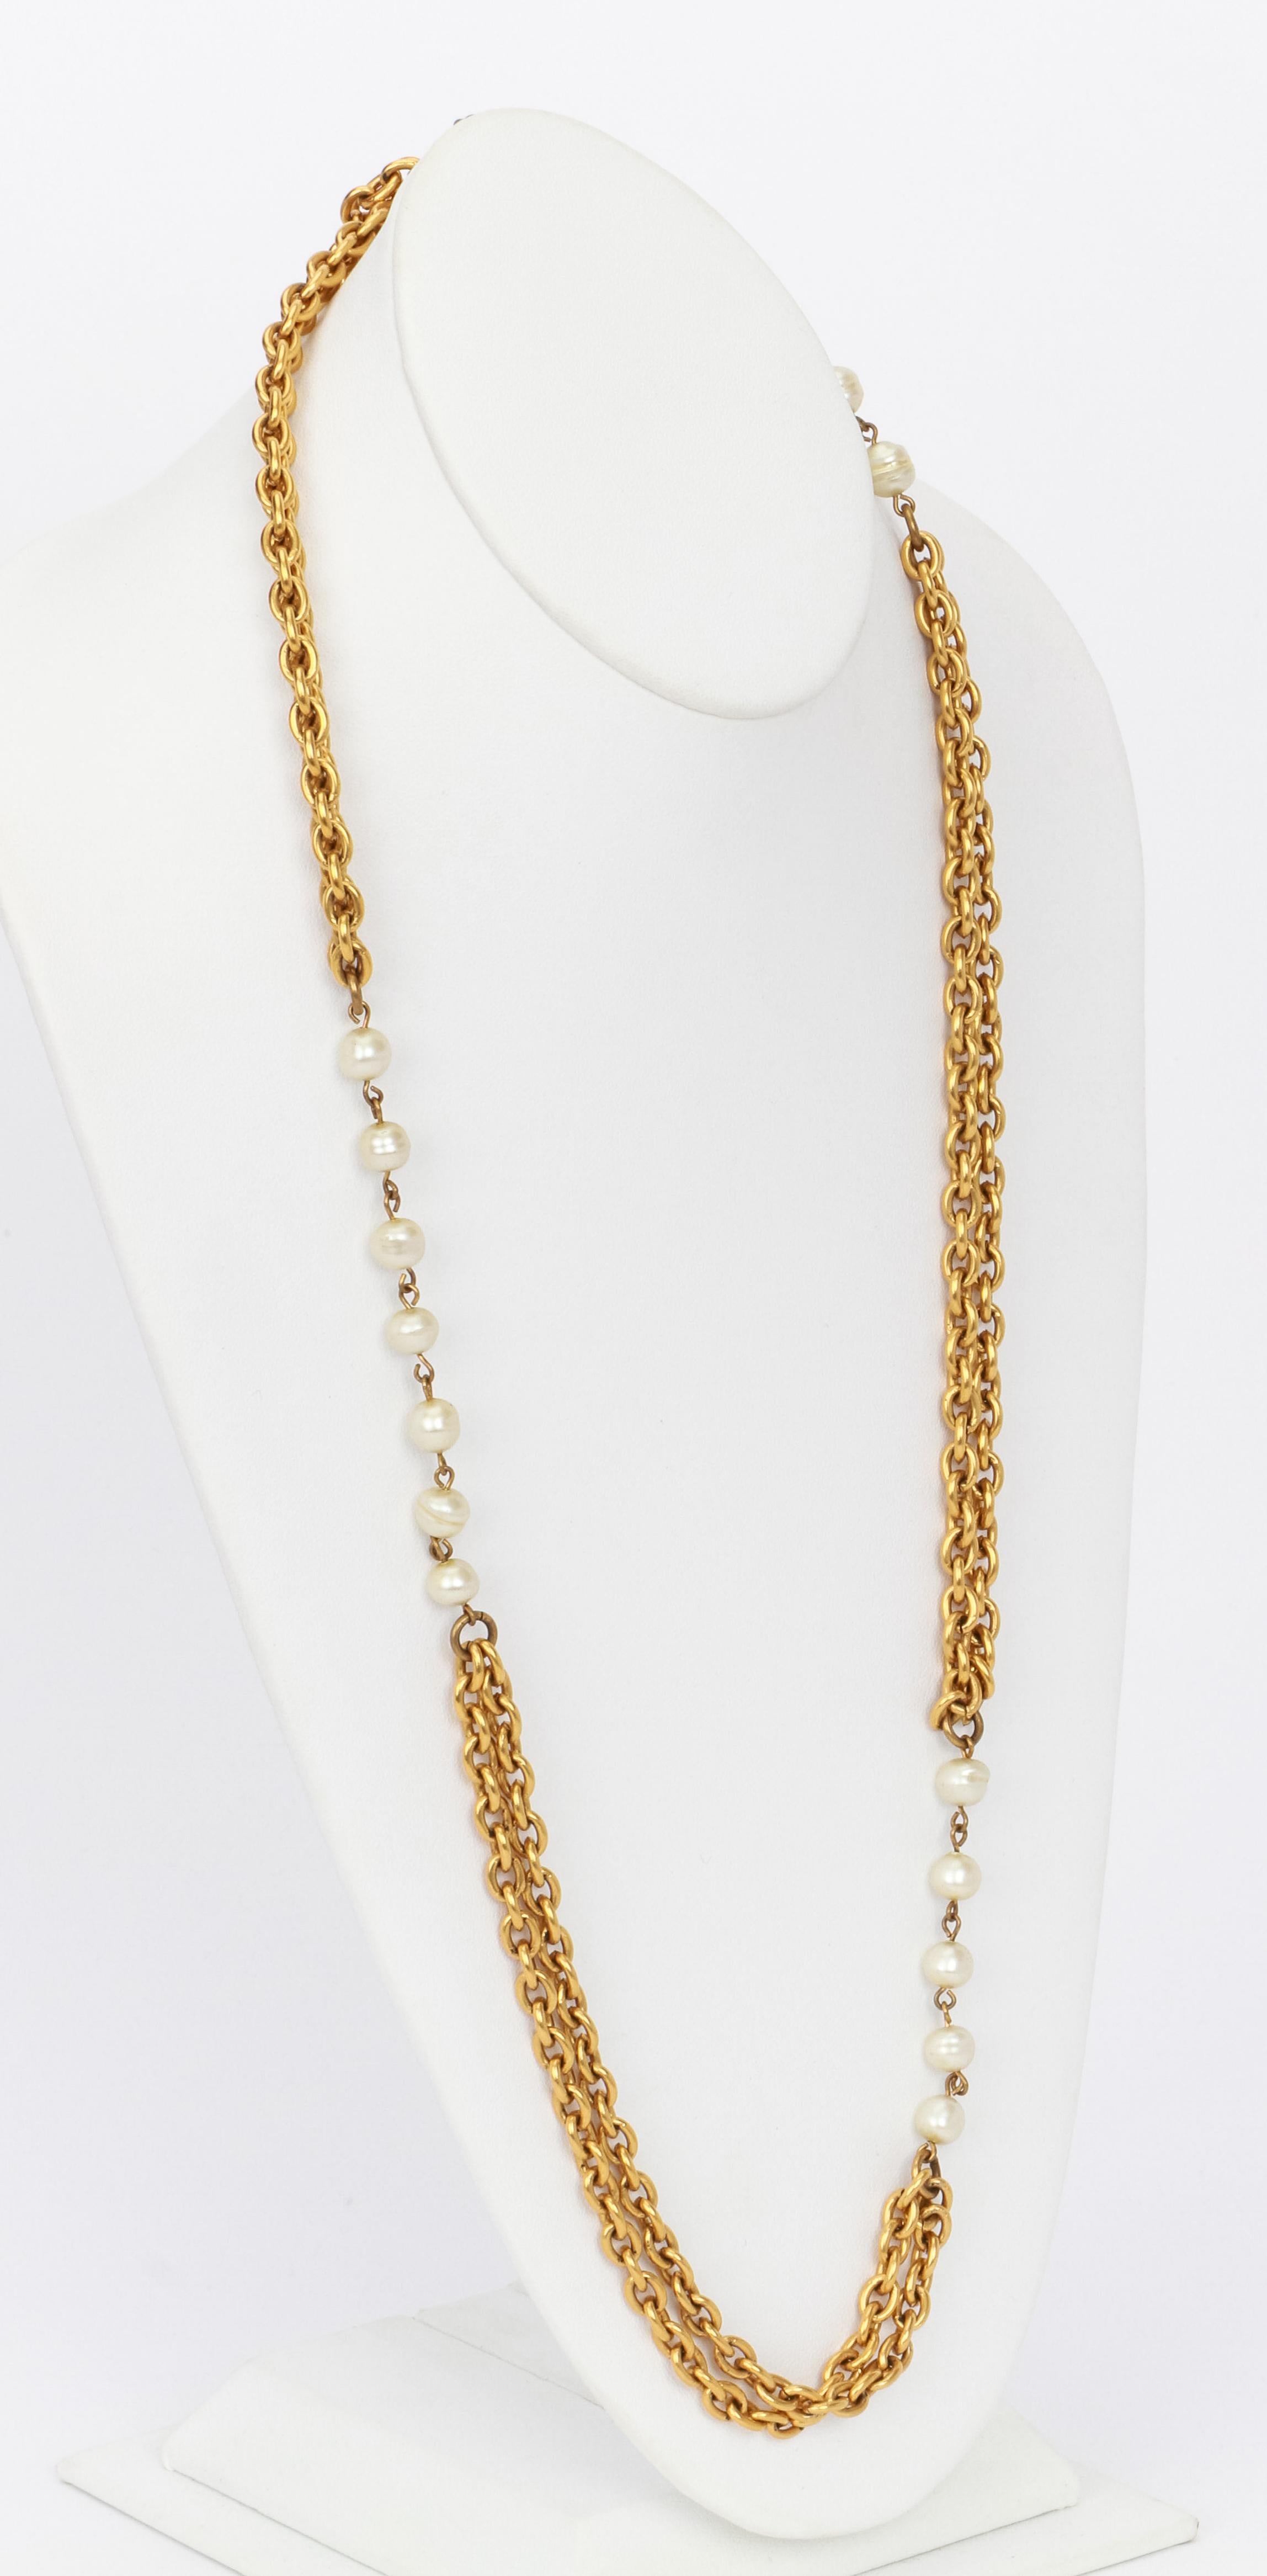 Chanel sautoir double gold chain necklace with pearls. Minor scuffing on pearls. Comes with velvet pouch .